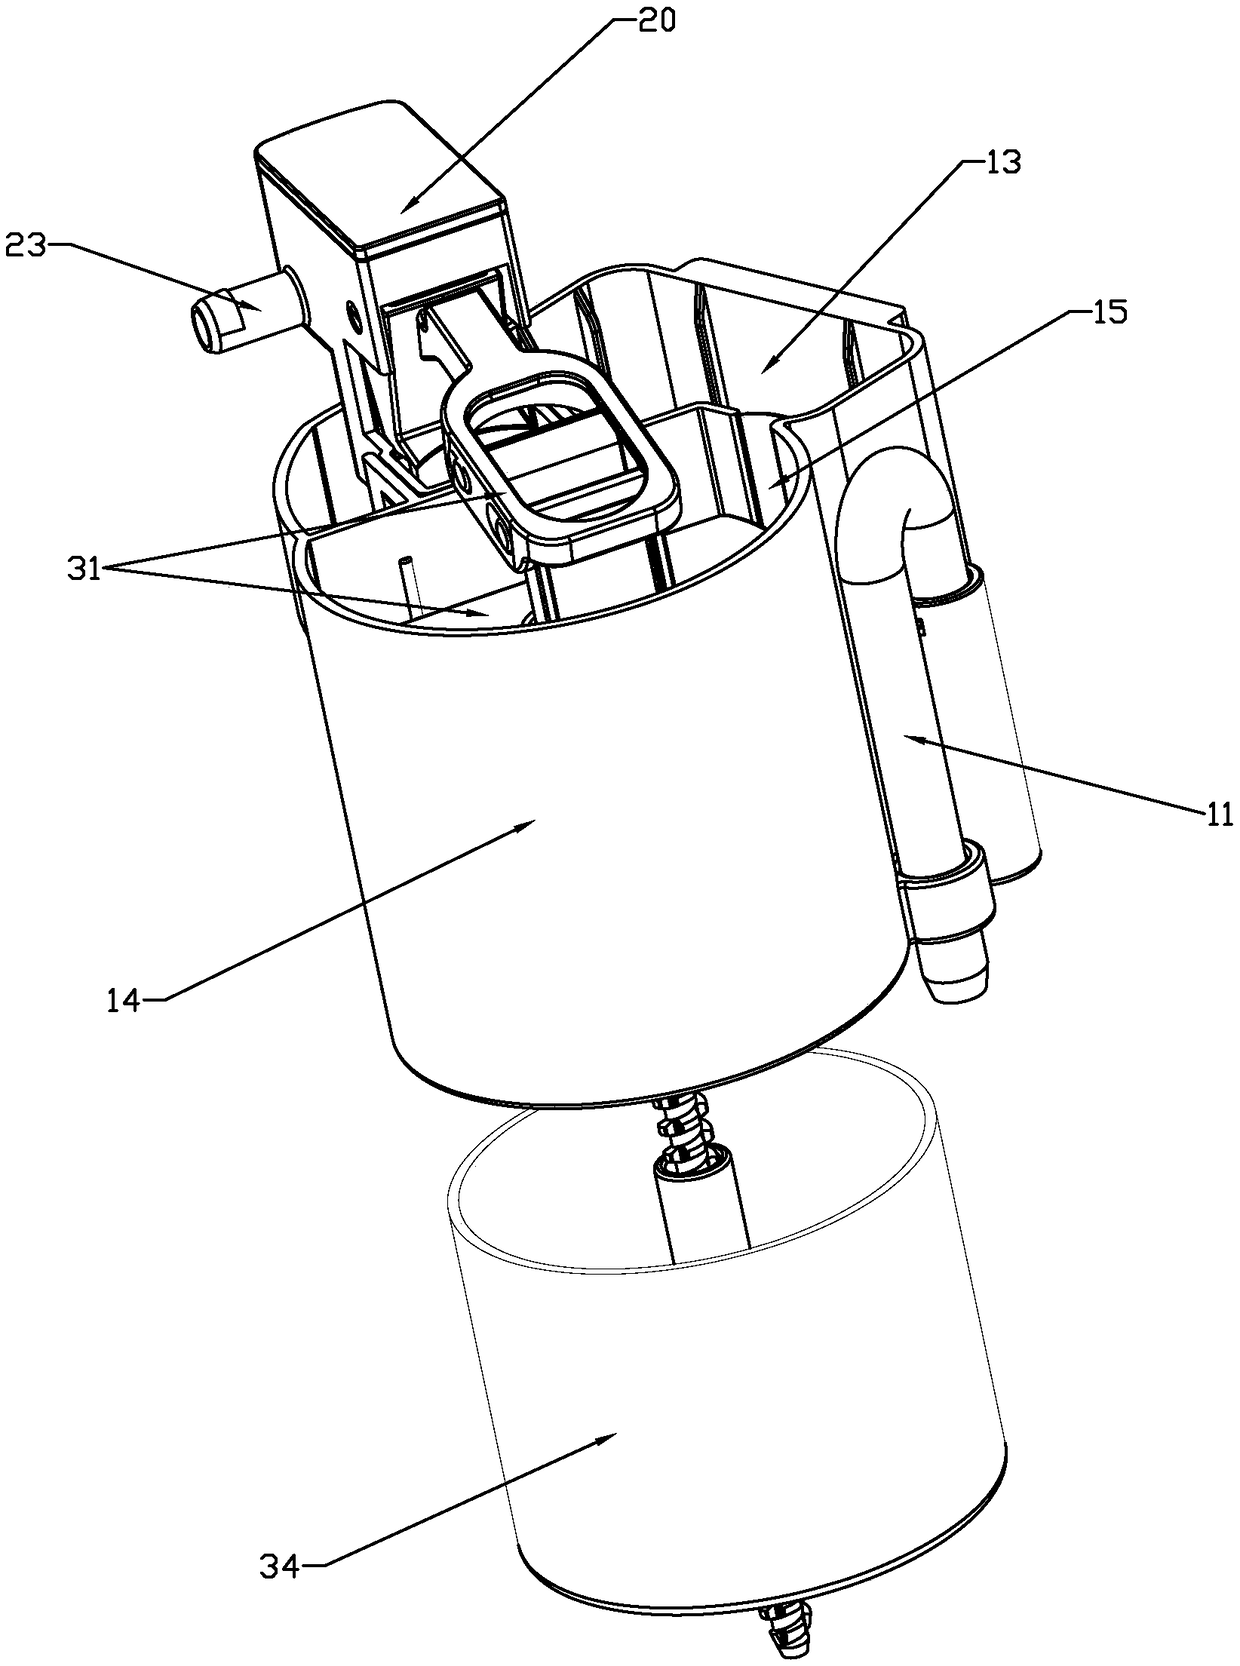 Device for adding cleaning fluid